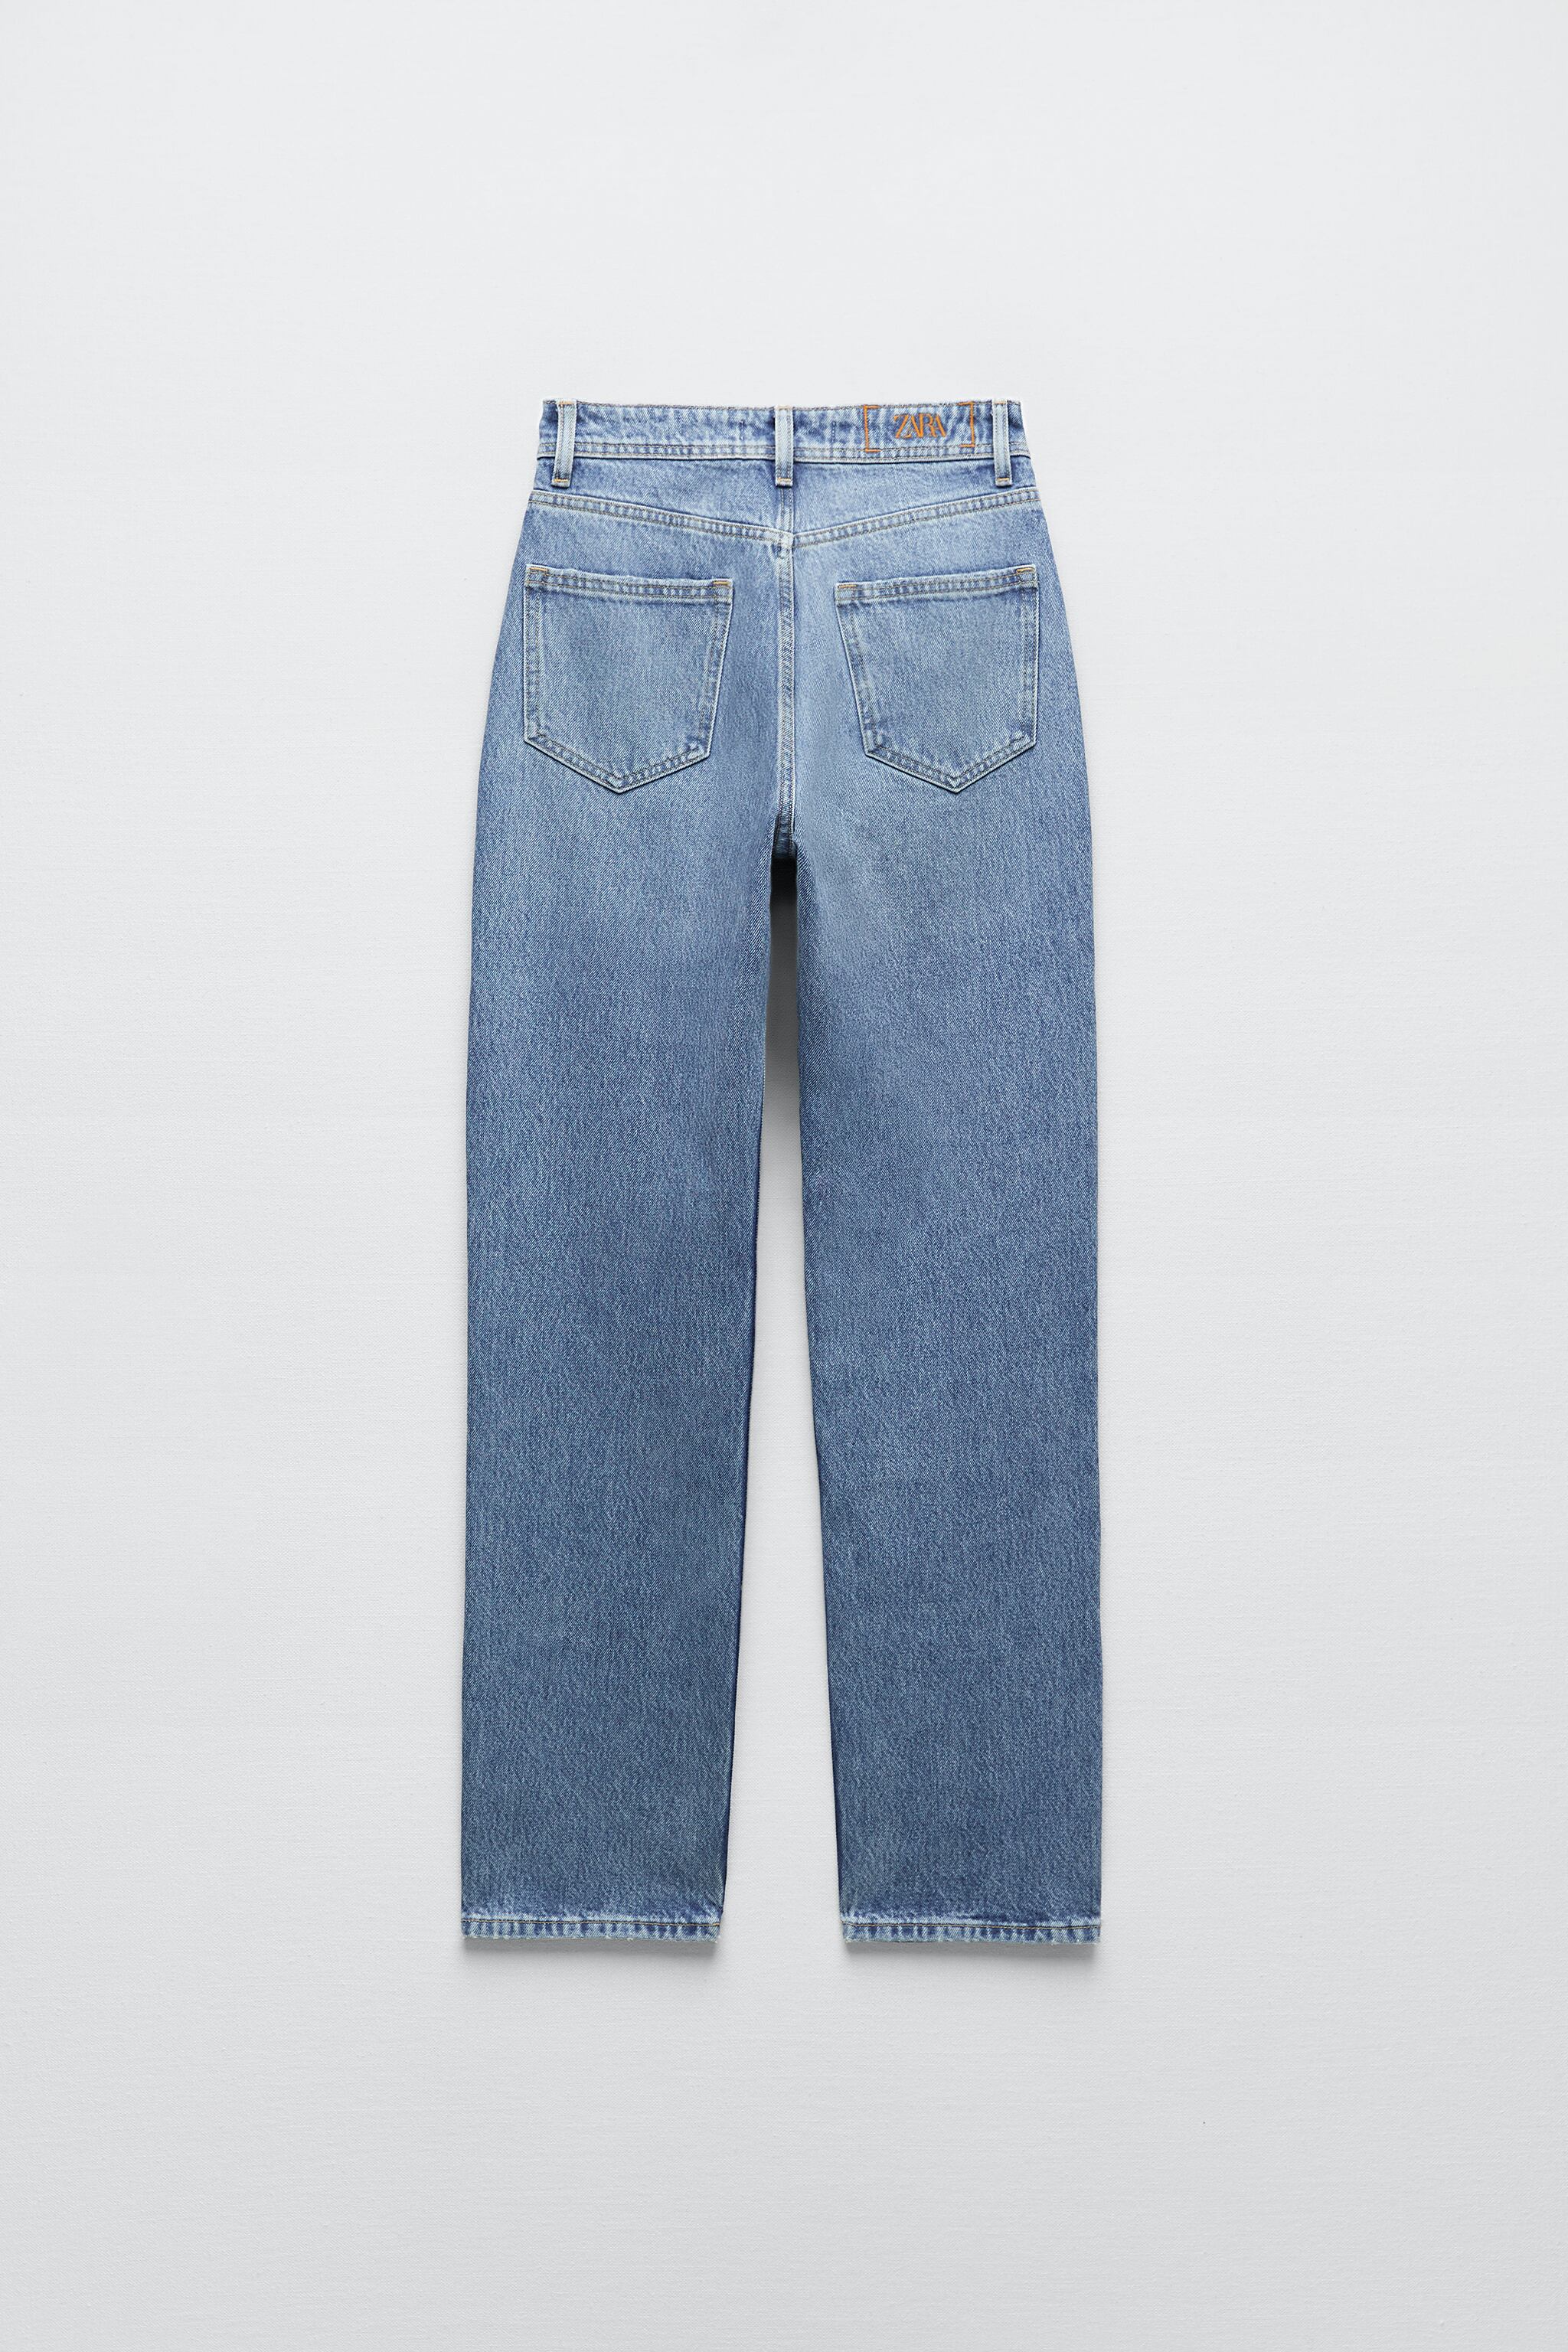 Z1975 HIGH RISE STRAIGHT JEANS